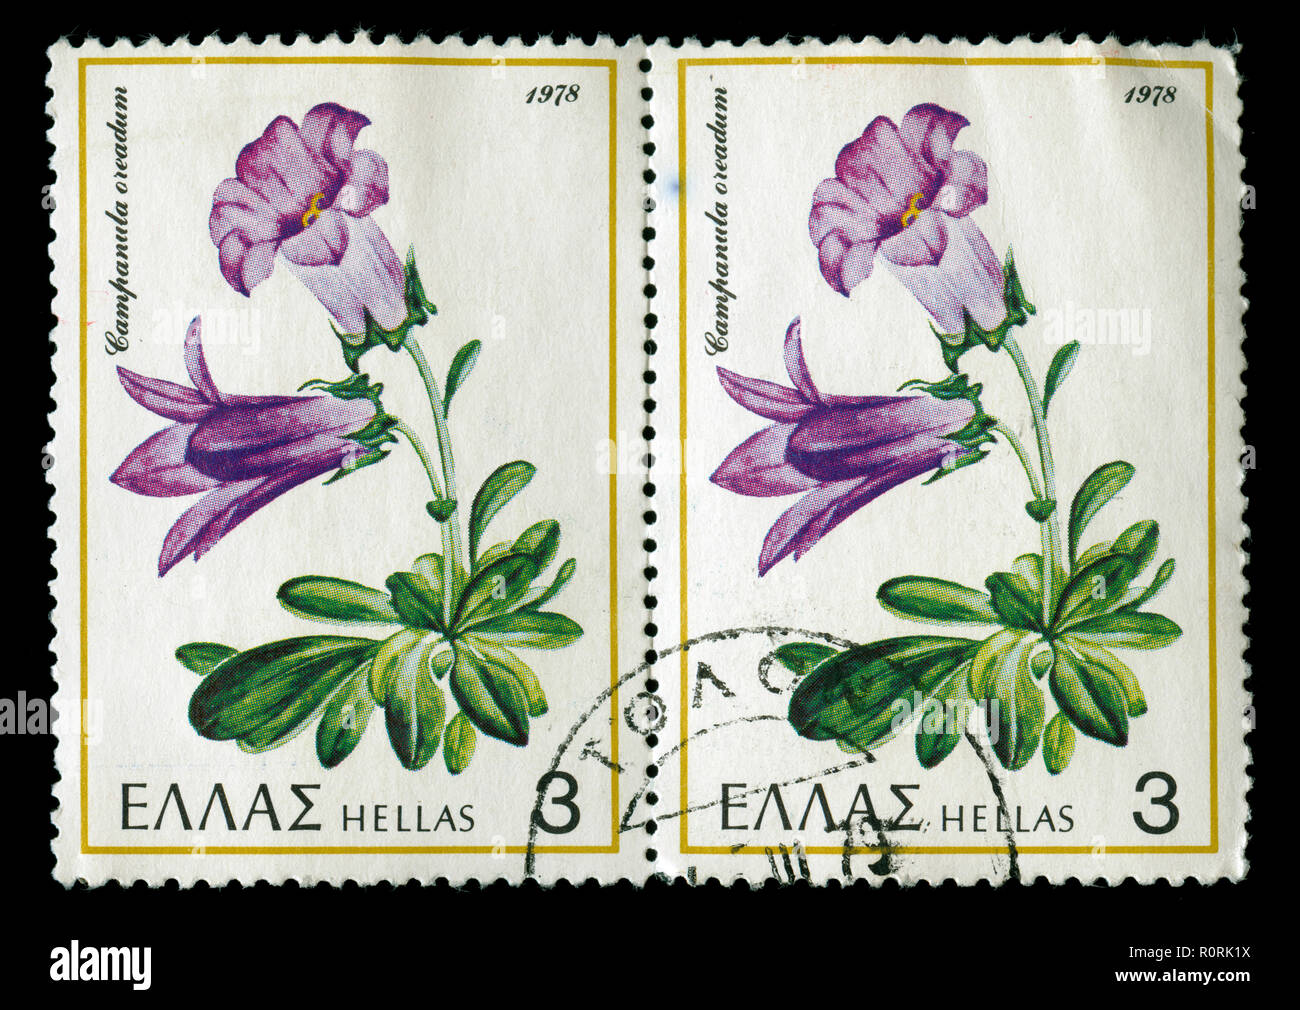 Postage stamps from Greece in the Greek Flora and Fauna series issued in 1978 Stock Photo